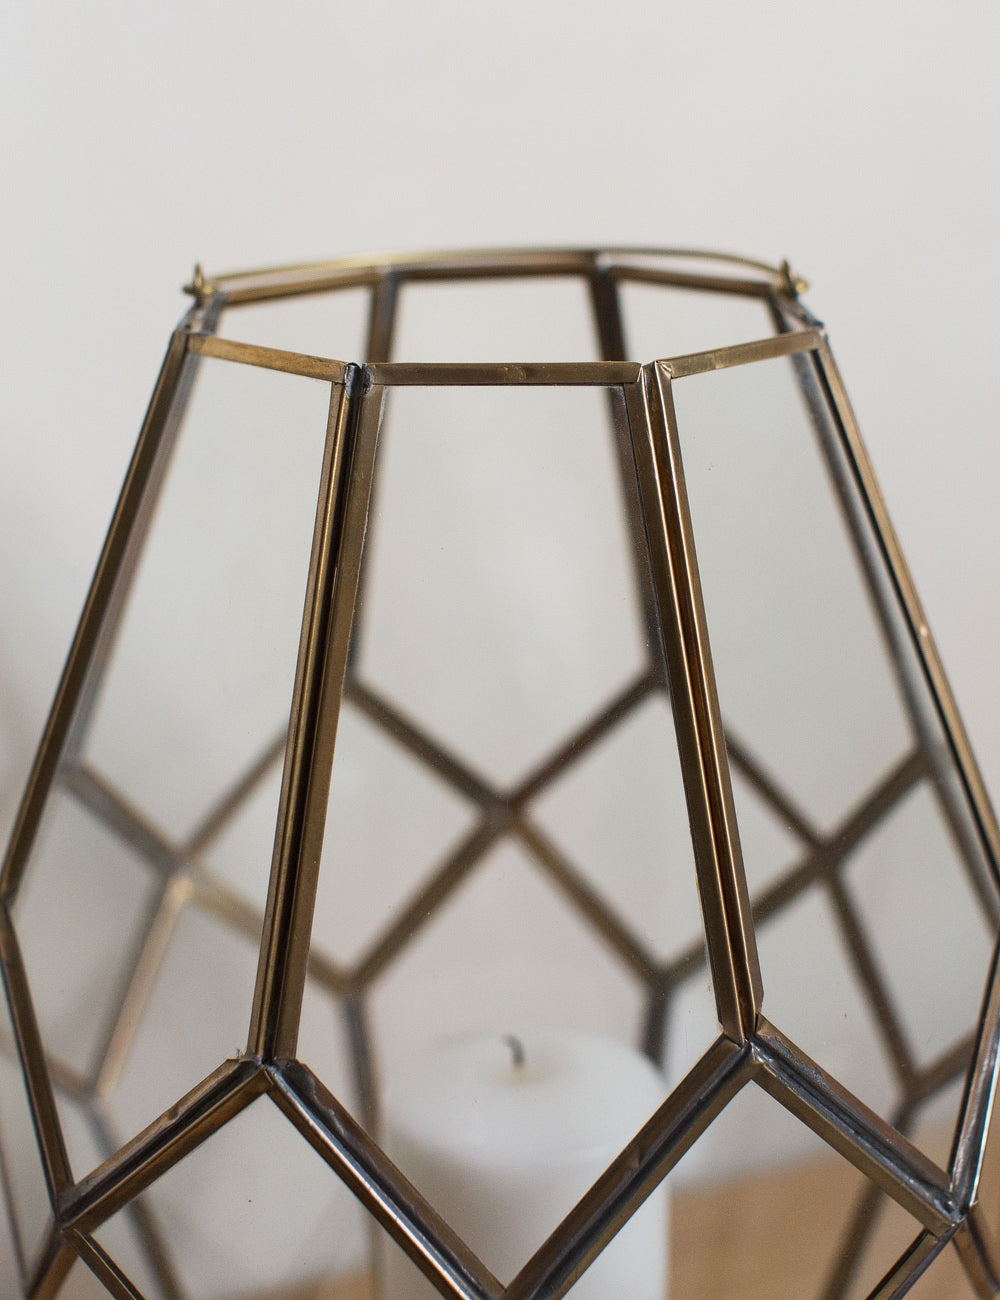 Antique Brass Hygge Lantern - small or large